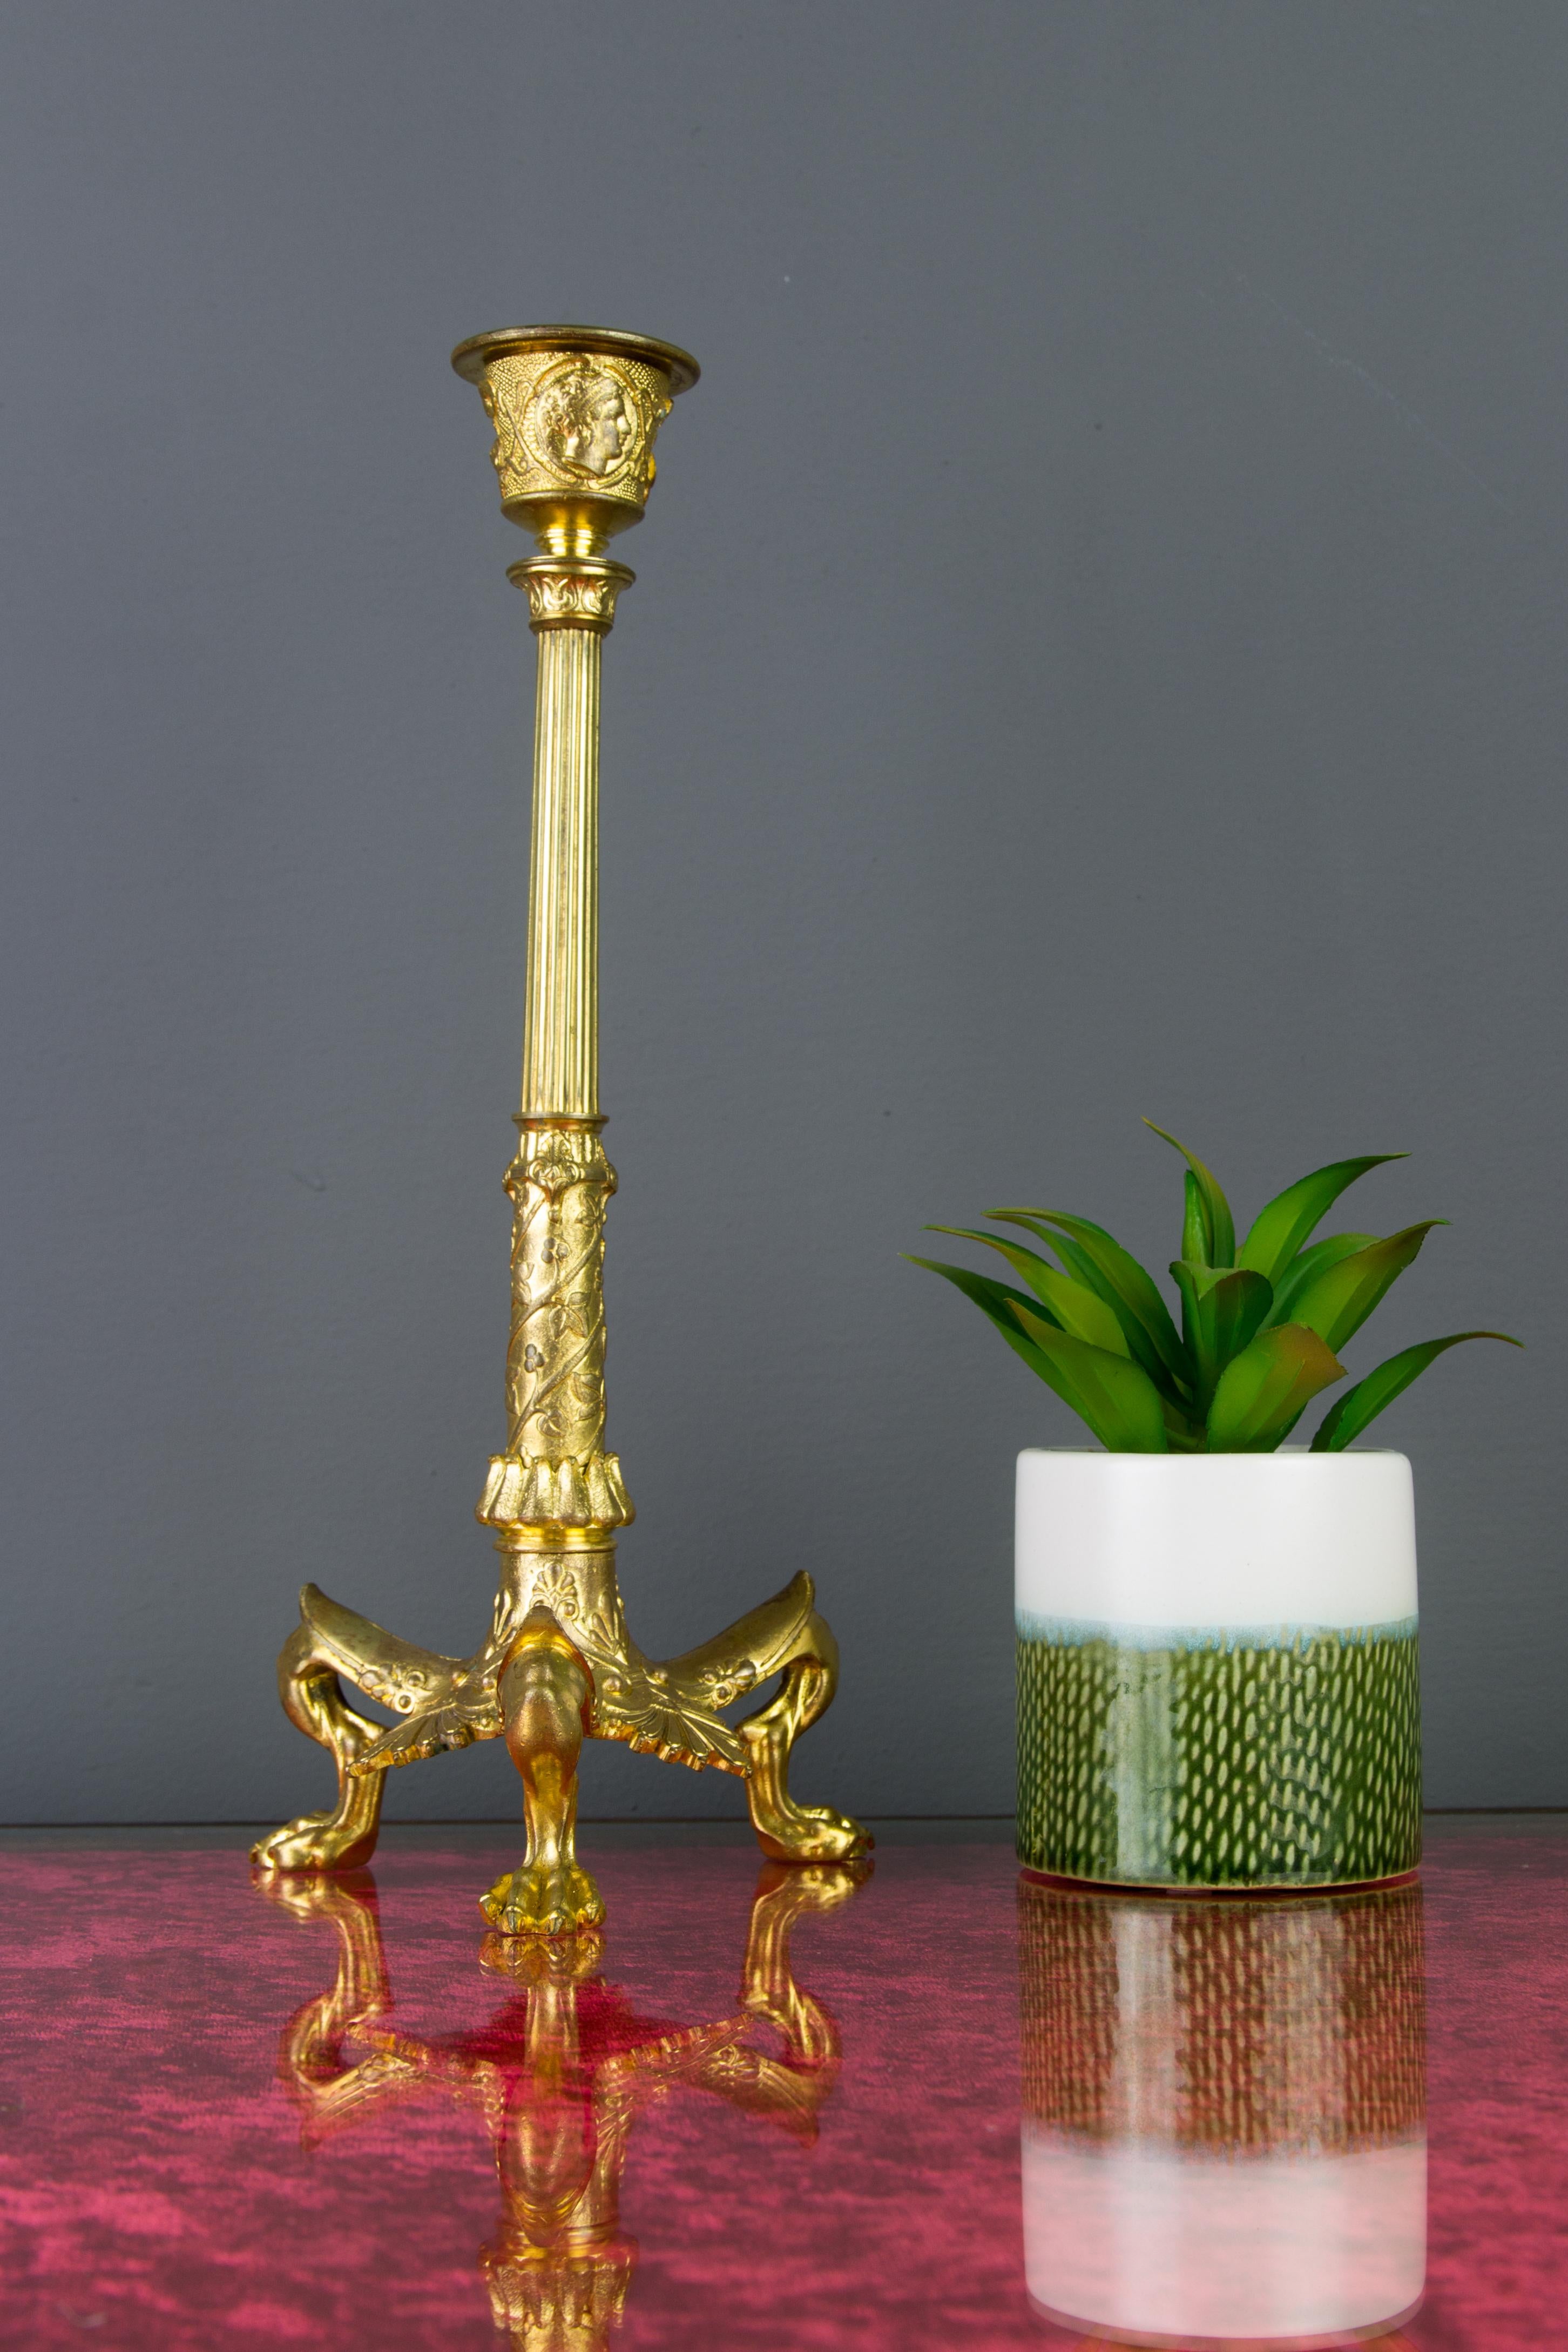 Mid-19th Century French Empire Style Gilt Bronze Candlestick on Tripod Base Claw Feet, circa 1860